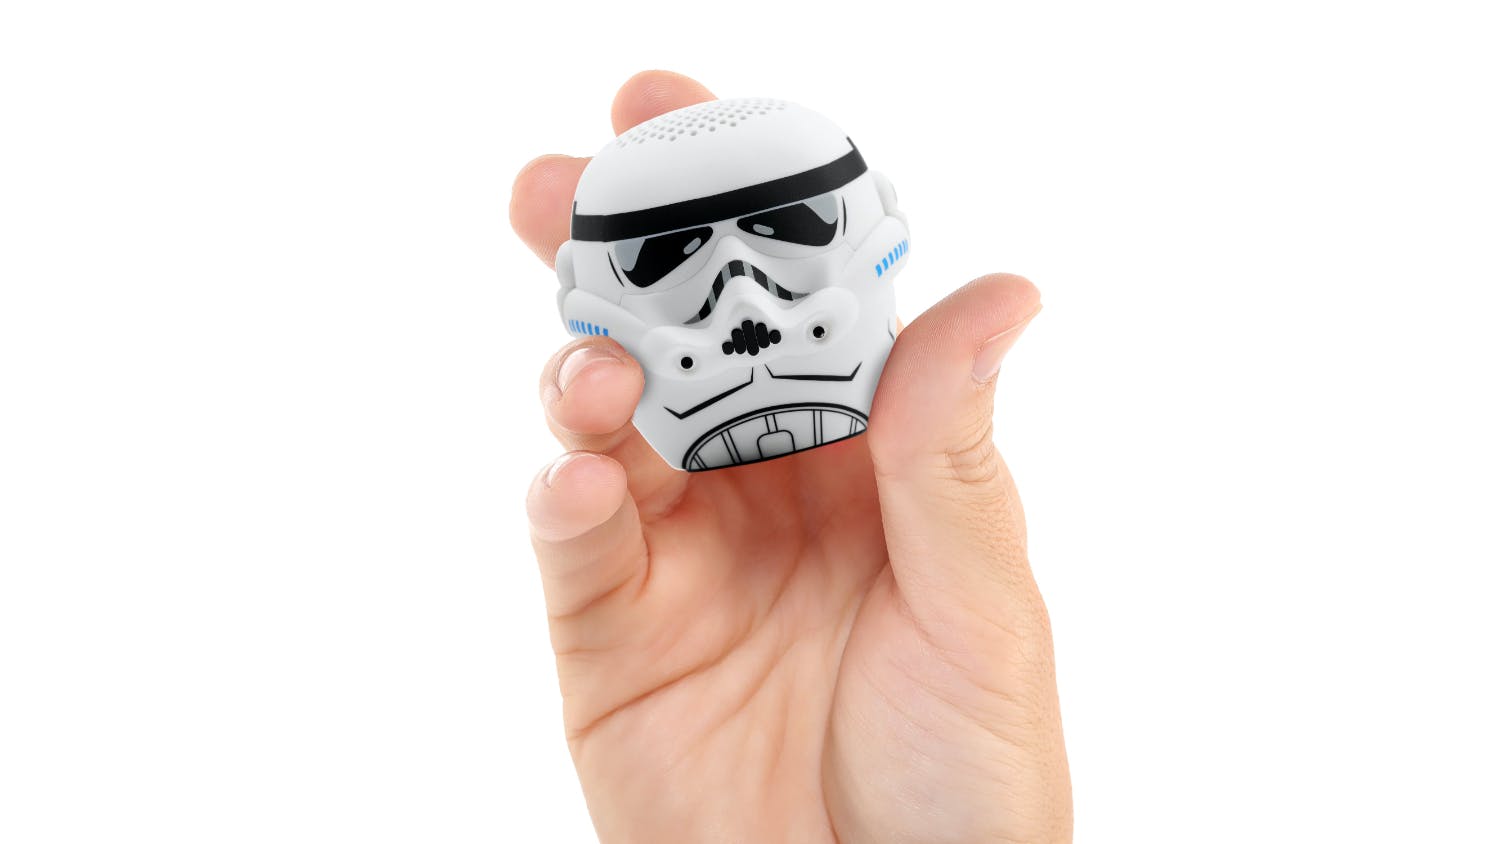 Bitty Boomers 2" Novelty Portable Bluetooth Speaker - Stormtrooper